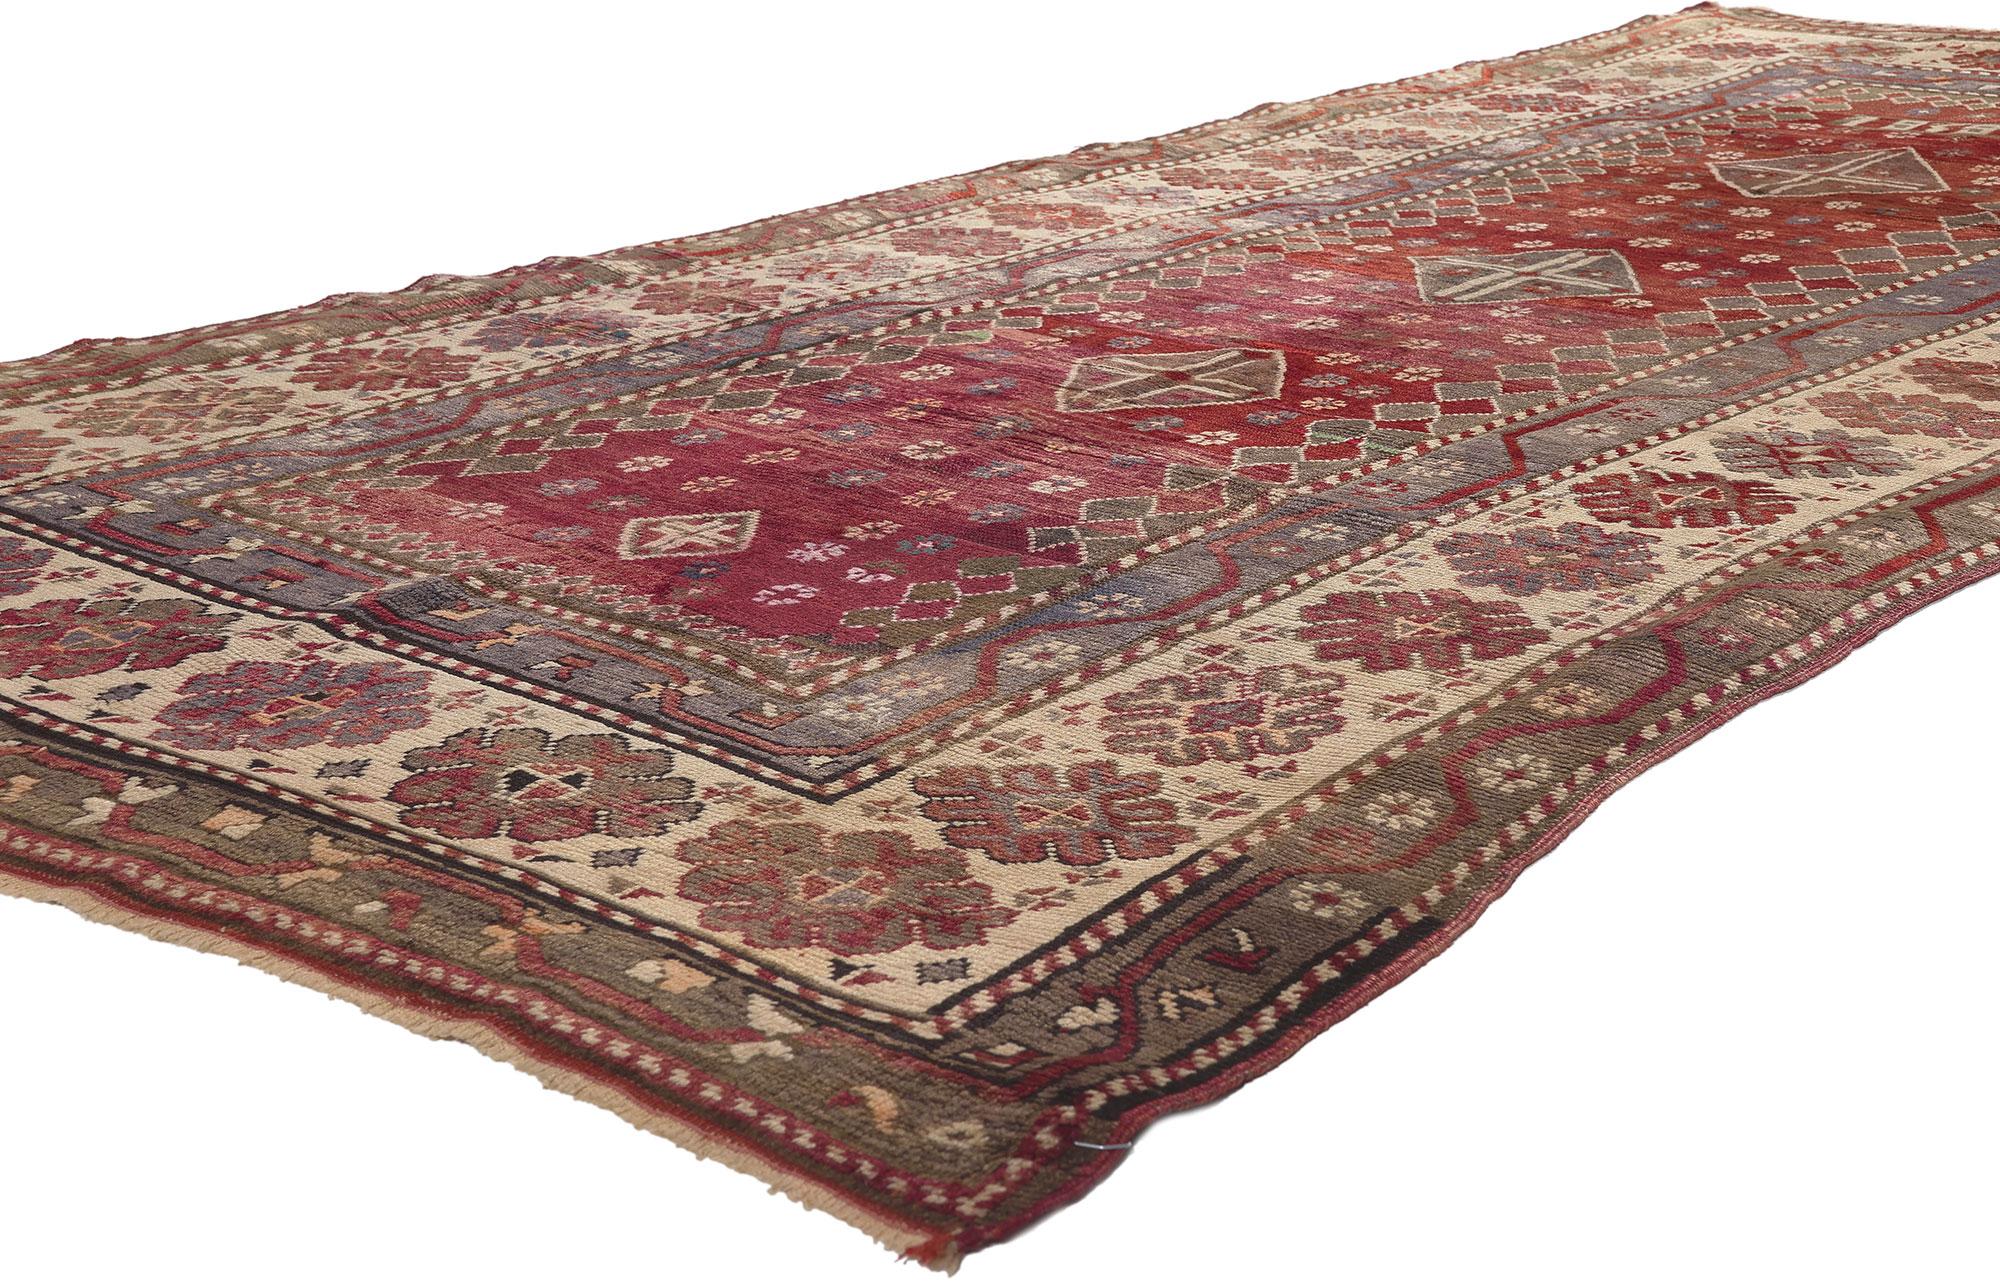 71469 Antique Caucasian Tribal Kurdish Rug, 04'07 x 11'00.
Nomadic charm meets boho chic in this hand knotted wool antique Caucasian Kurdish rug. The intrinsic tribal design earthy colorway woven into this piece work together creating a warm and